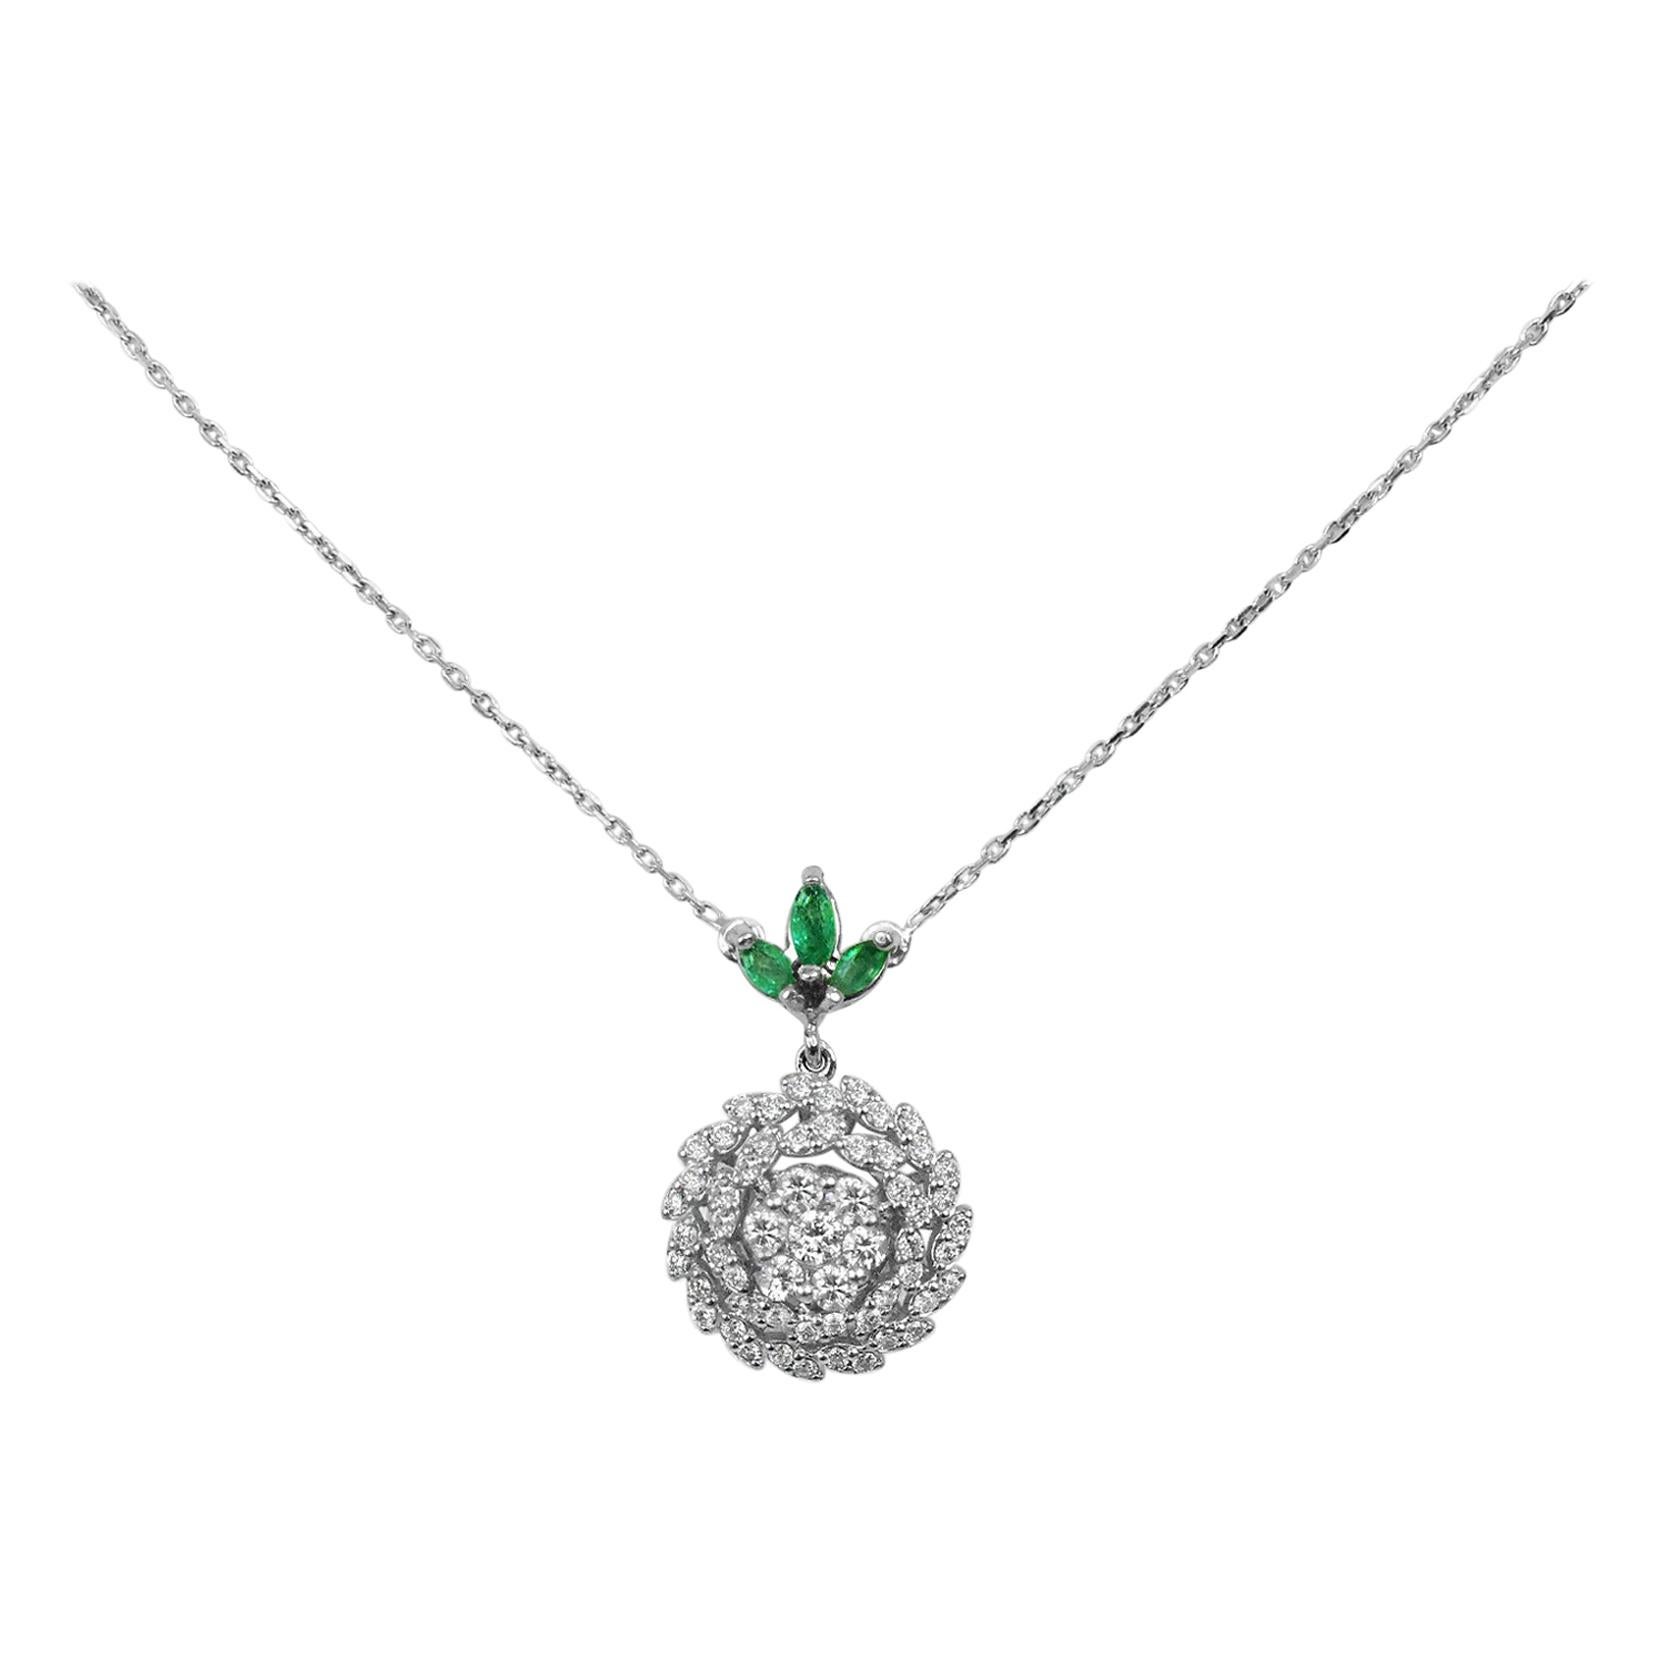 18Karat Gold Pendant Necklace White Gold Diamond Pave Emerald Marquise
        This 18K solid white Gold Emerald / Diamond pendant necklace. The fine Quality gold finishing with marquise shape Zambian emeralds & scintillating cluster pave set